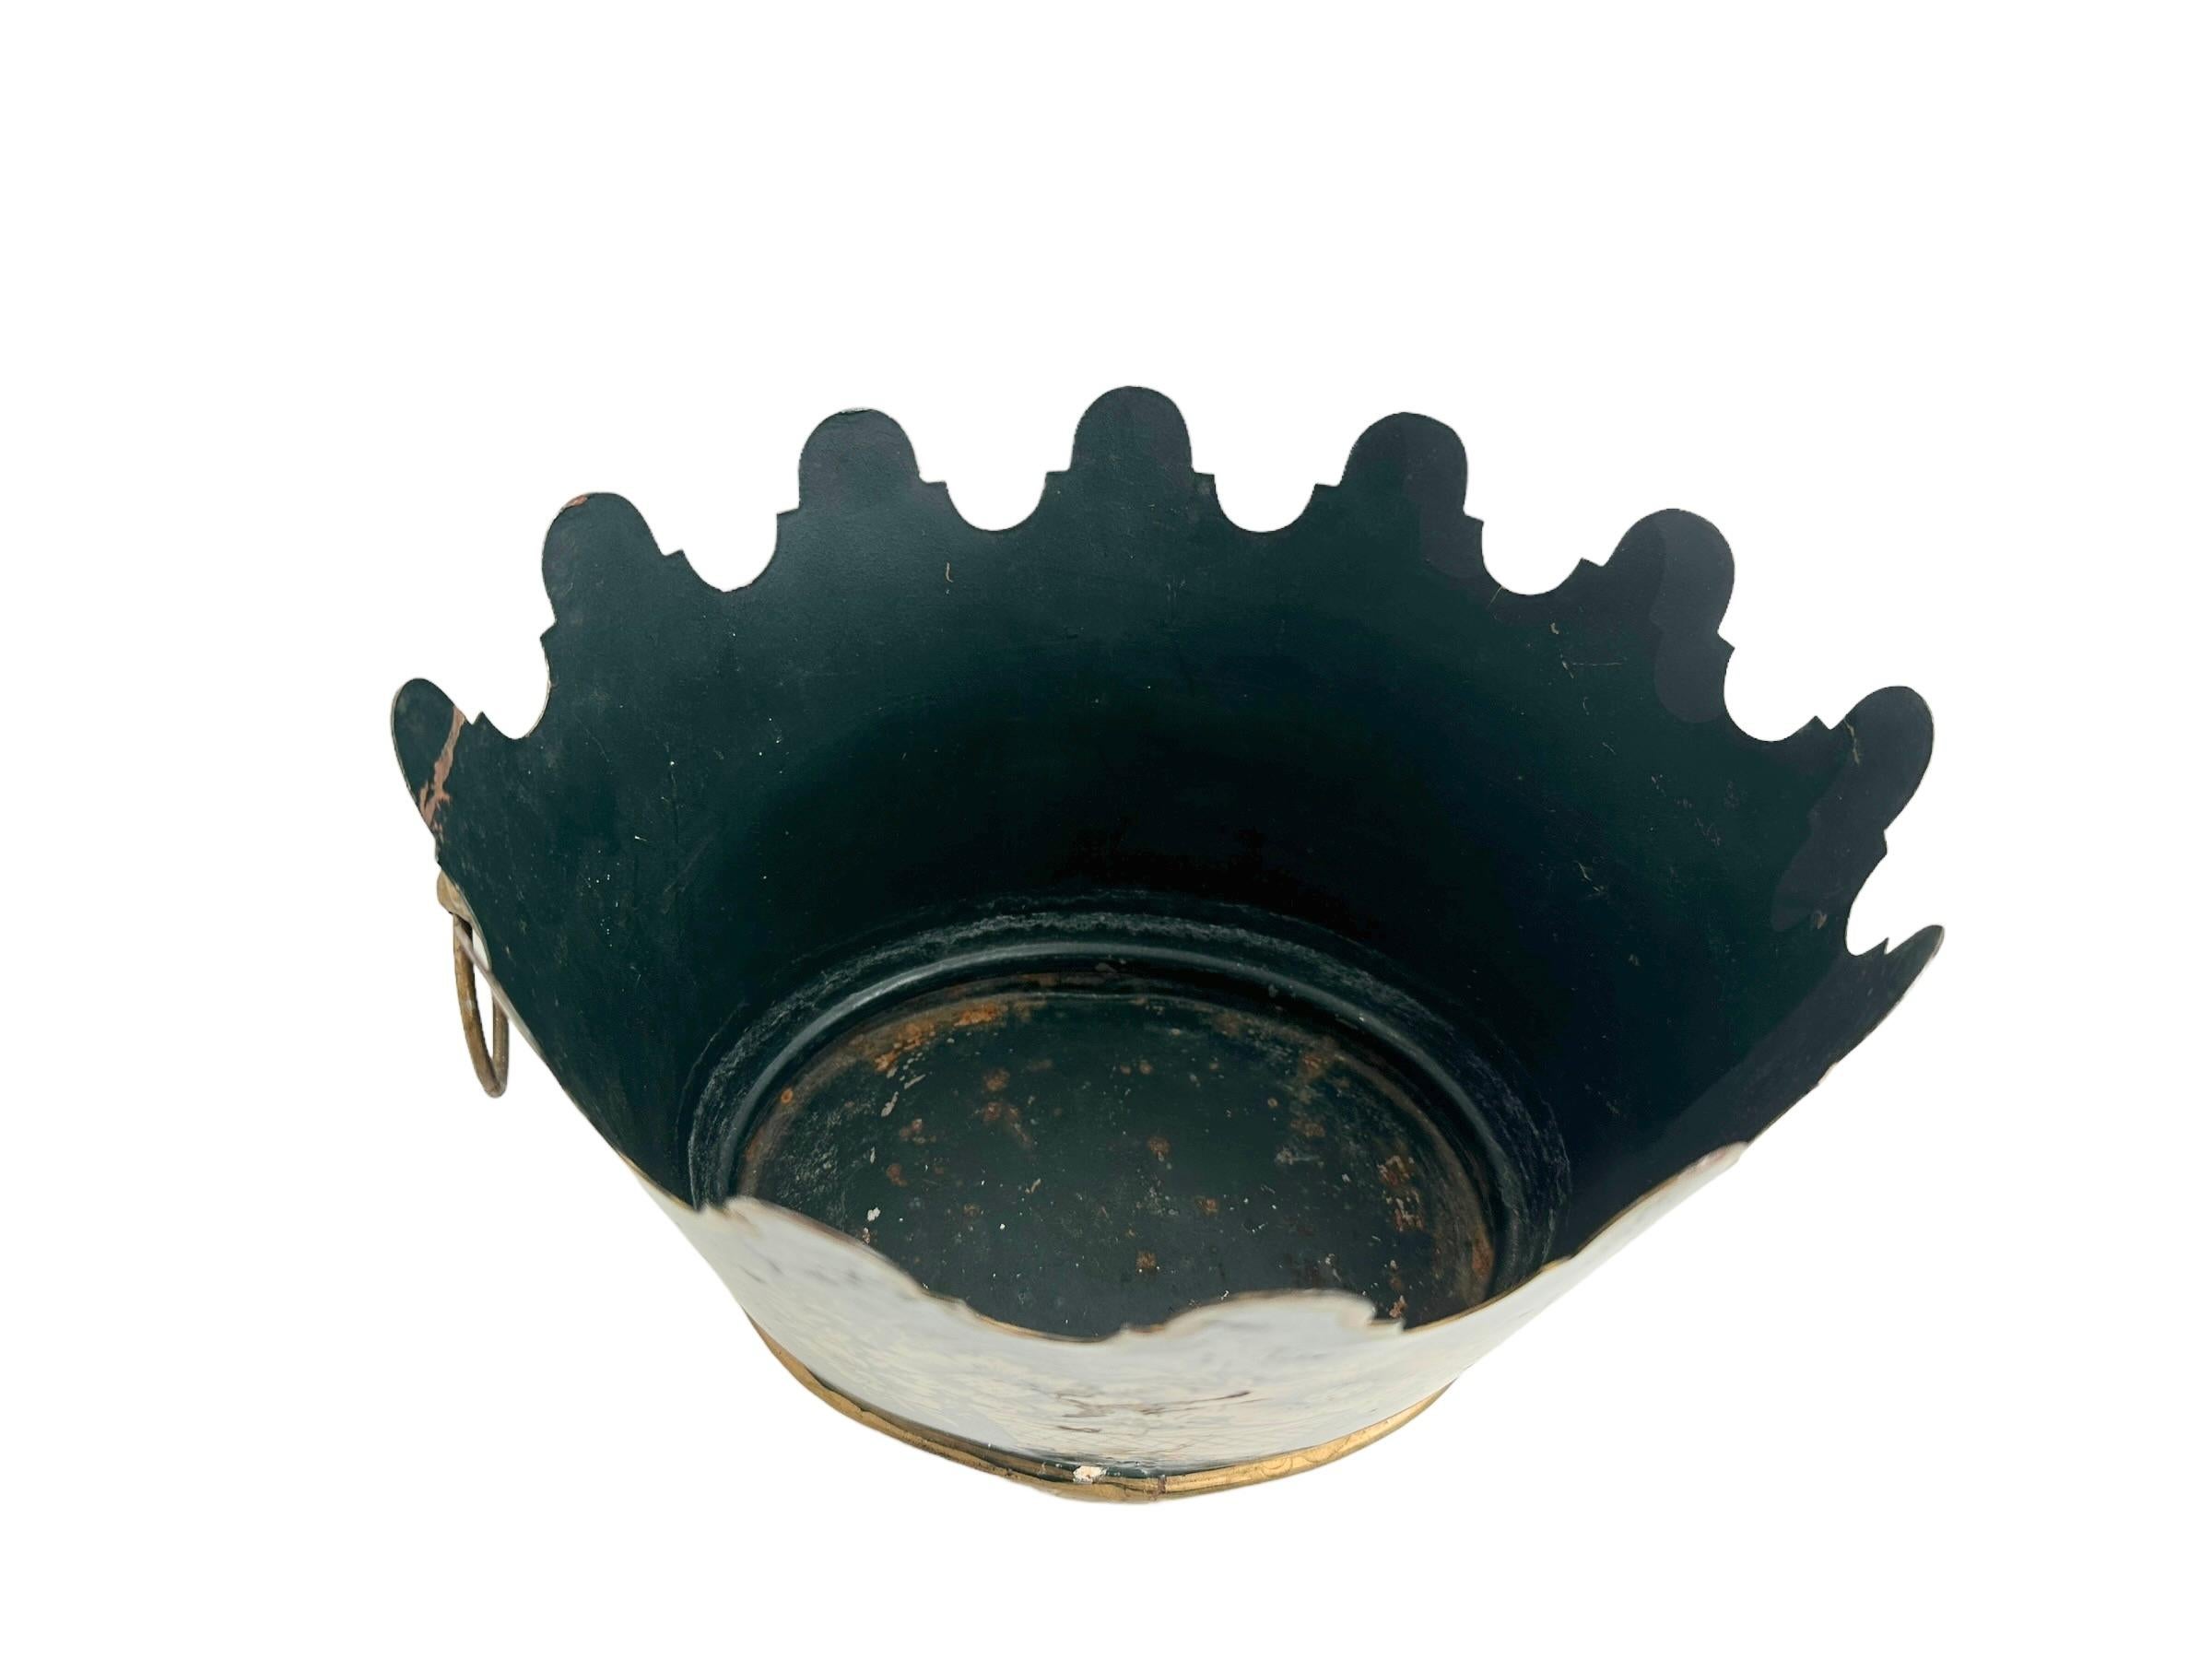 This listing is for a beautiful fabulous vintage Cachepot. Made of metal with a cute design. Black background with gold detailing. Perfect to use with flowers with a saucer or as a decorative accent. This is a pre-owned item so please see all